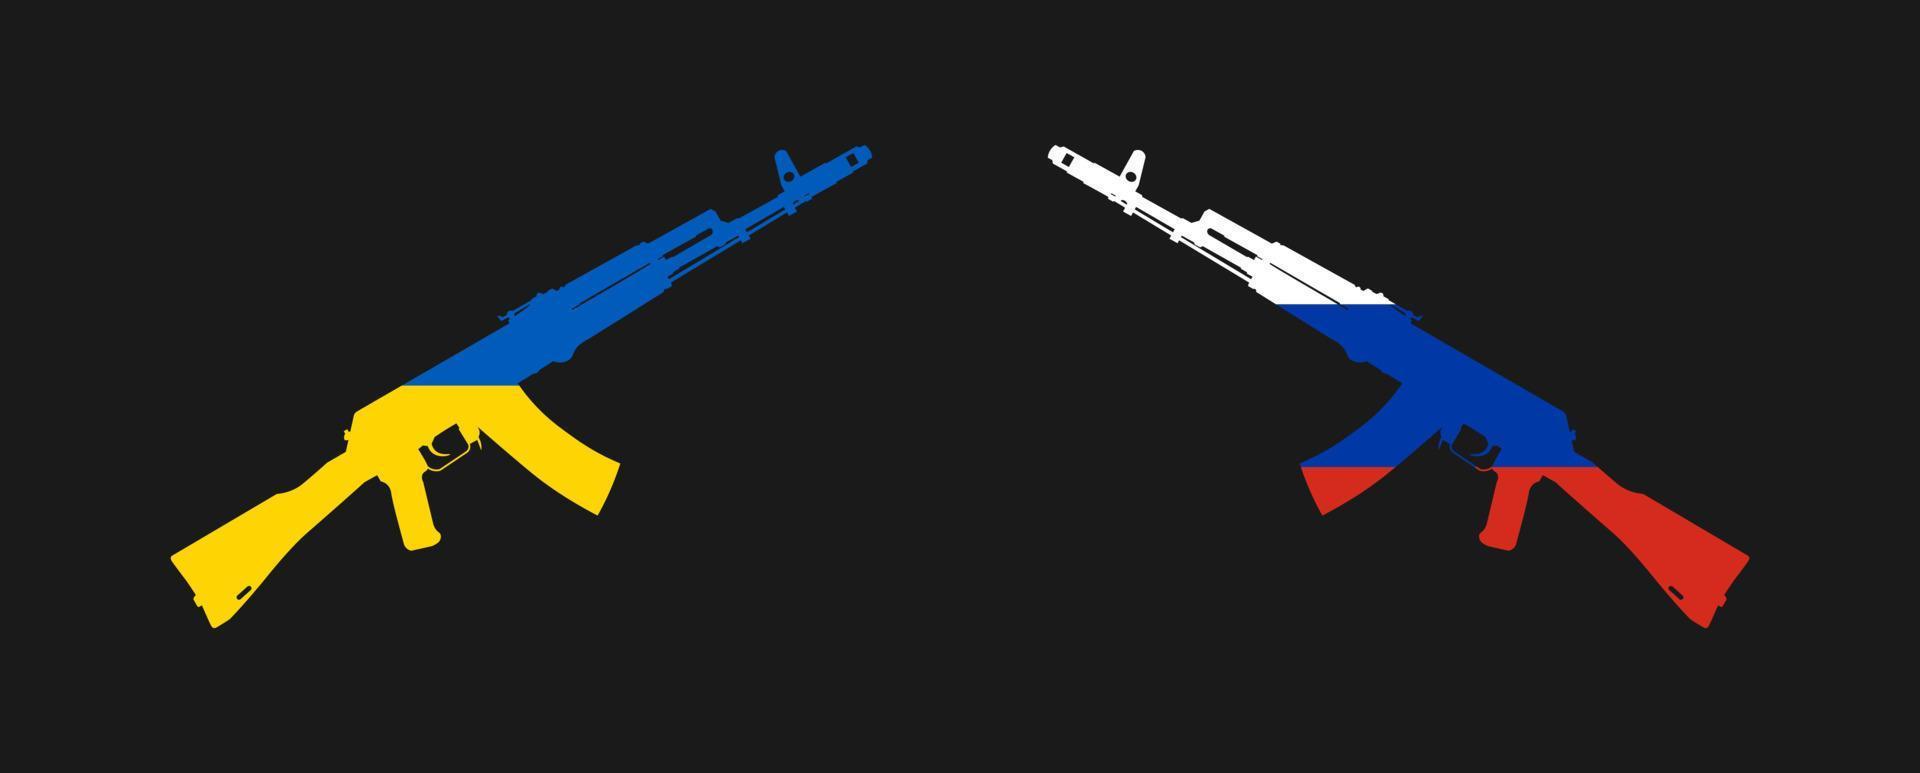 Ukraine vs Russia Military conflict between Ukrainian and Russian country and nation vector